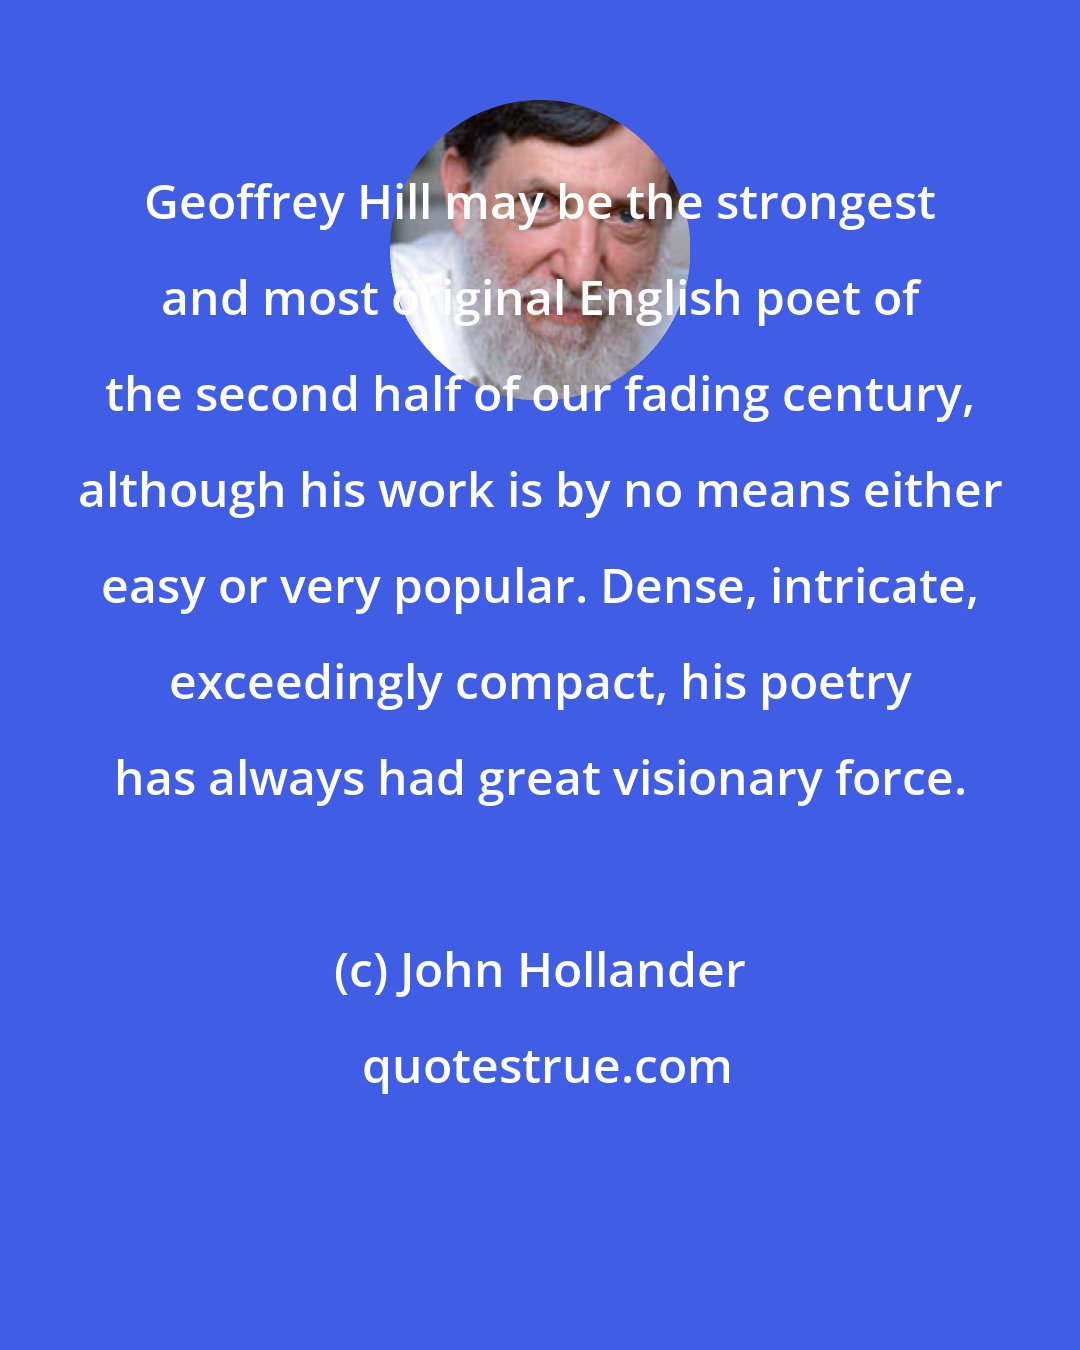 John Hollander: Geoffrey Hill may be the strongest and most original English poet of the second half of our fading century, although his work is by no means either easy or very popular. Dense, intricate, exceedingly compact, his poetry has always had great visionary force.